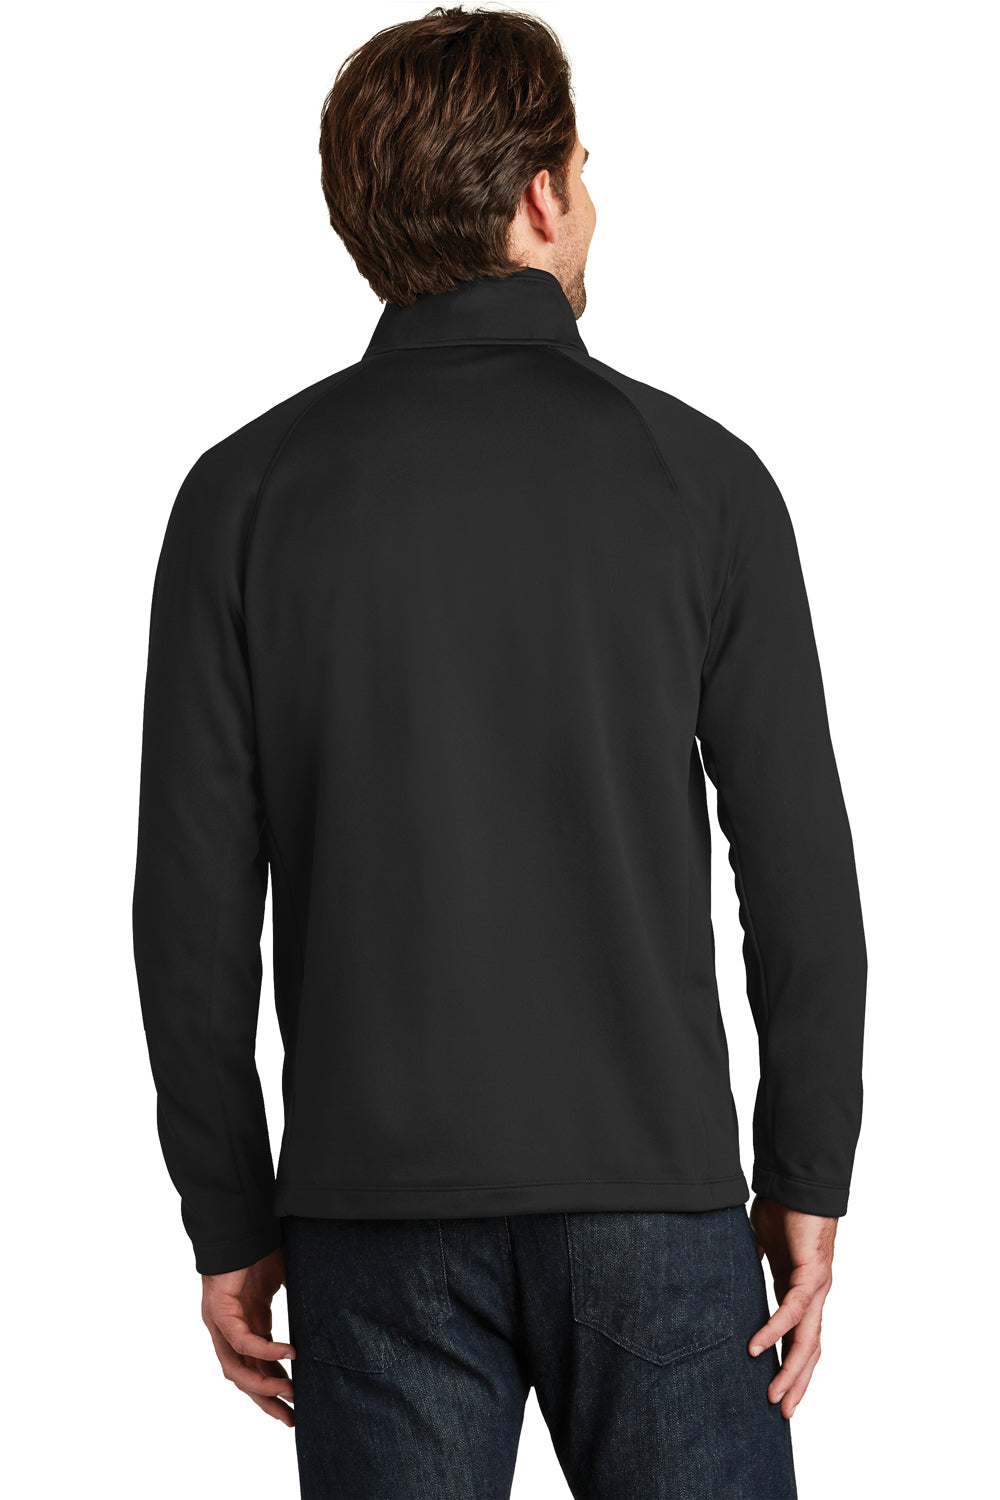 The North Face NF0A3LH9 Mens Canyon Flats Full Zip Fleece Jacket Black Back